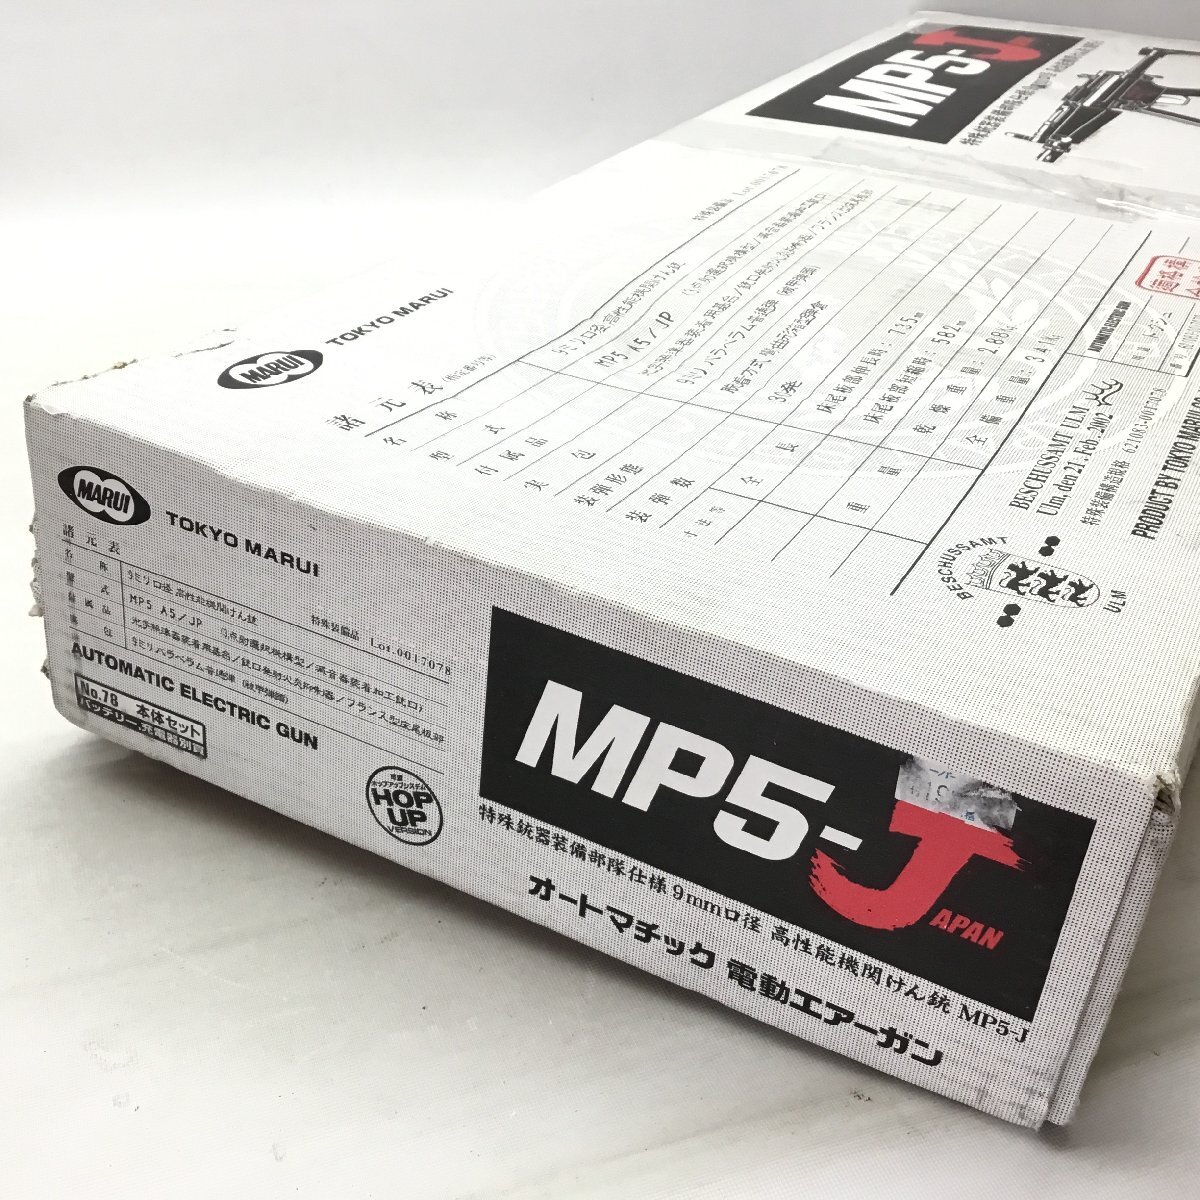 #TOKYO MARUI Tokyo Marui automatic electric air gun MP5 A5/JP battery deterioration according to operation unknown junk /3.59kg